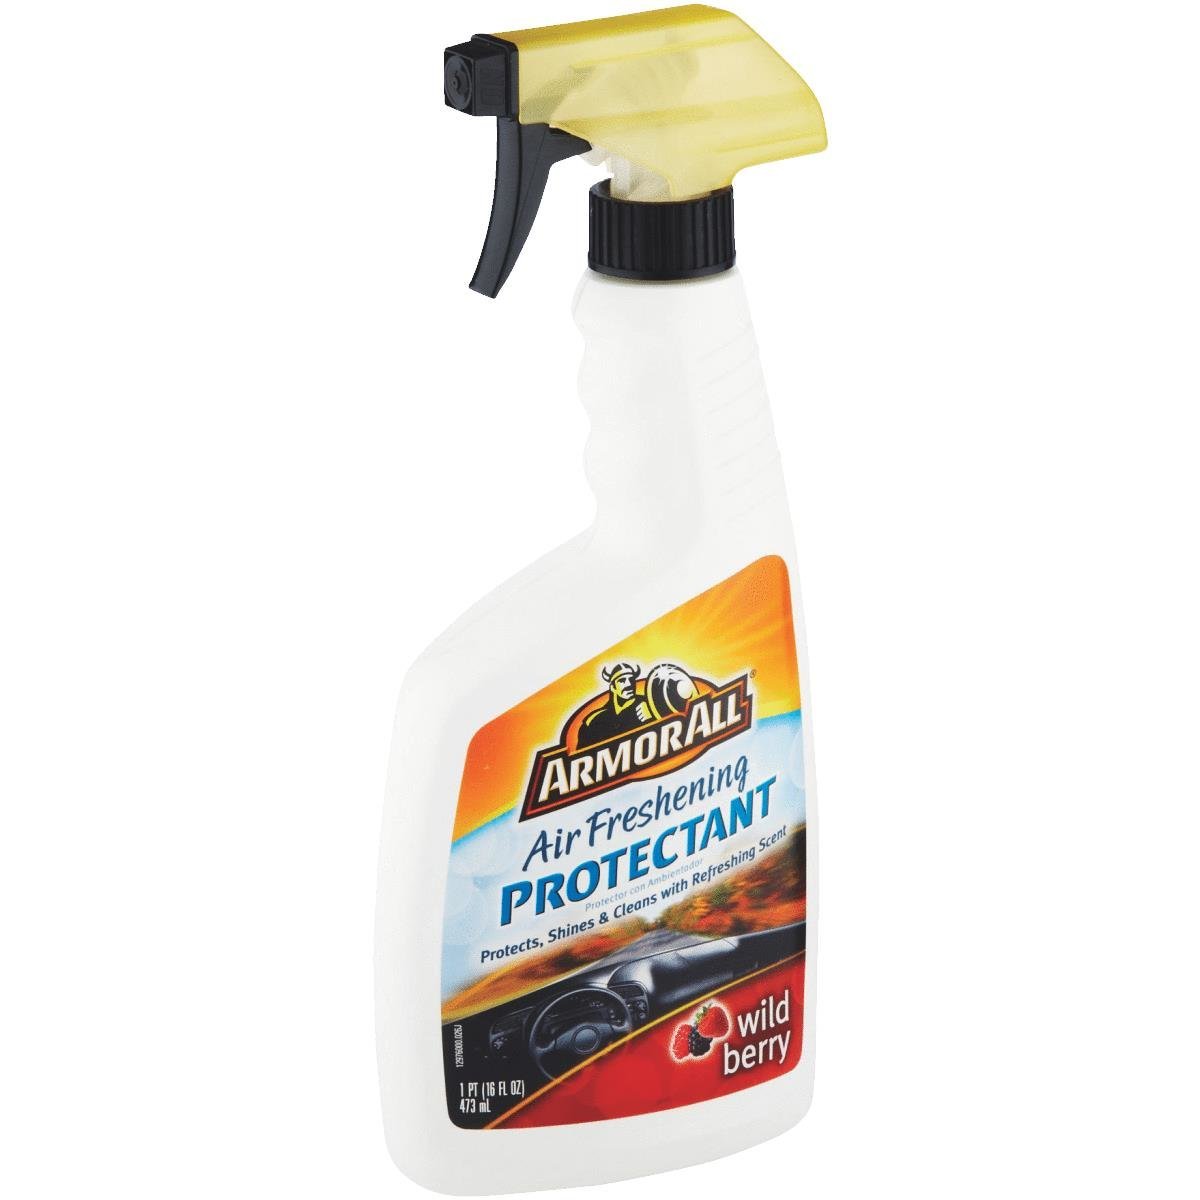 Armorall Air Freshening Protectant  Wild Berry